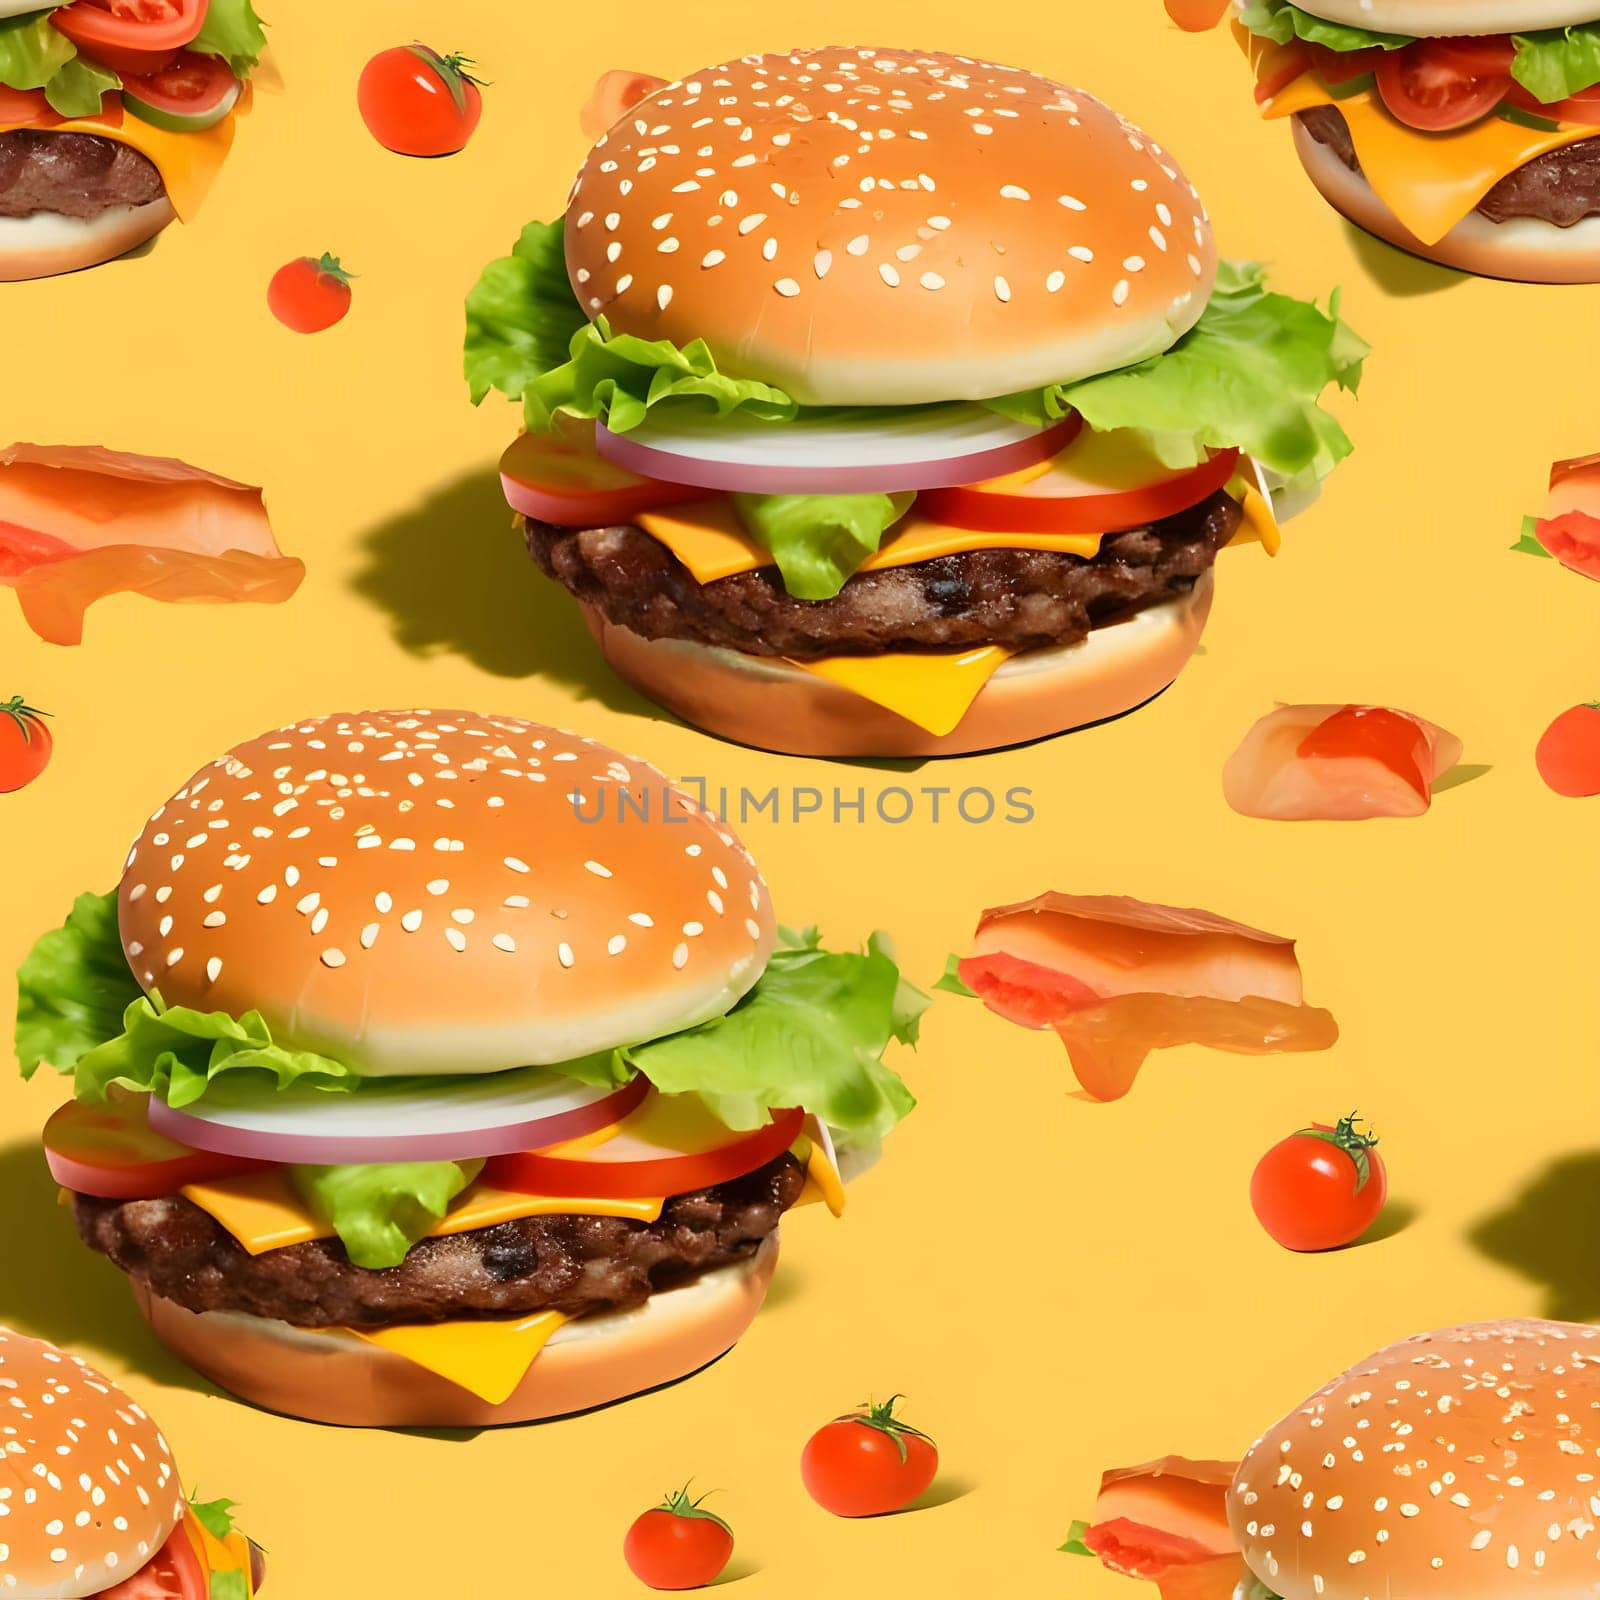 A multitude of mouthwatering hamburgers displayed against a vibrant yellow backdrop.